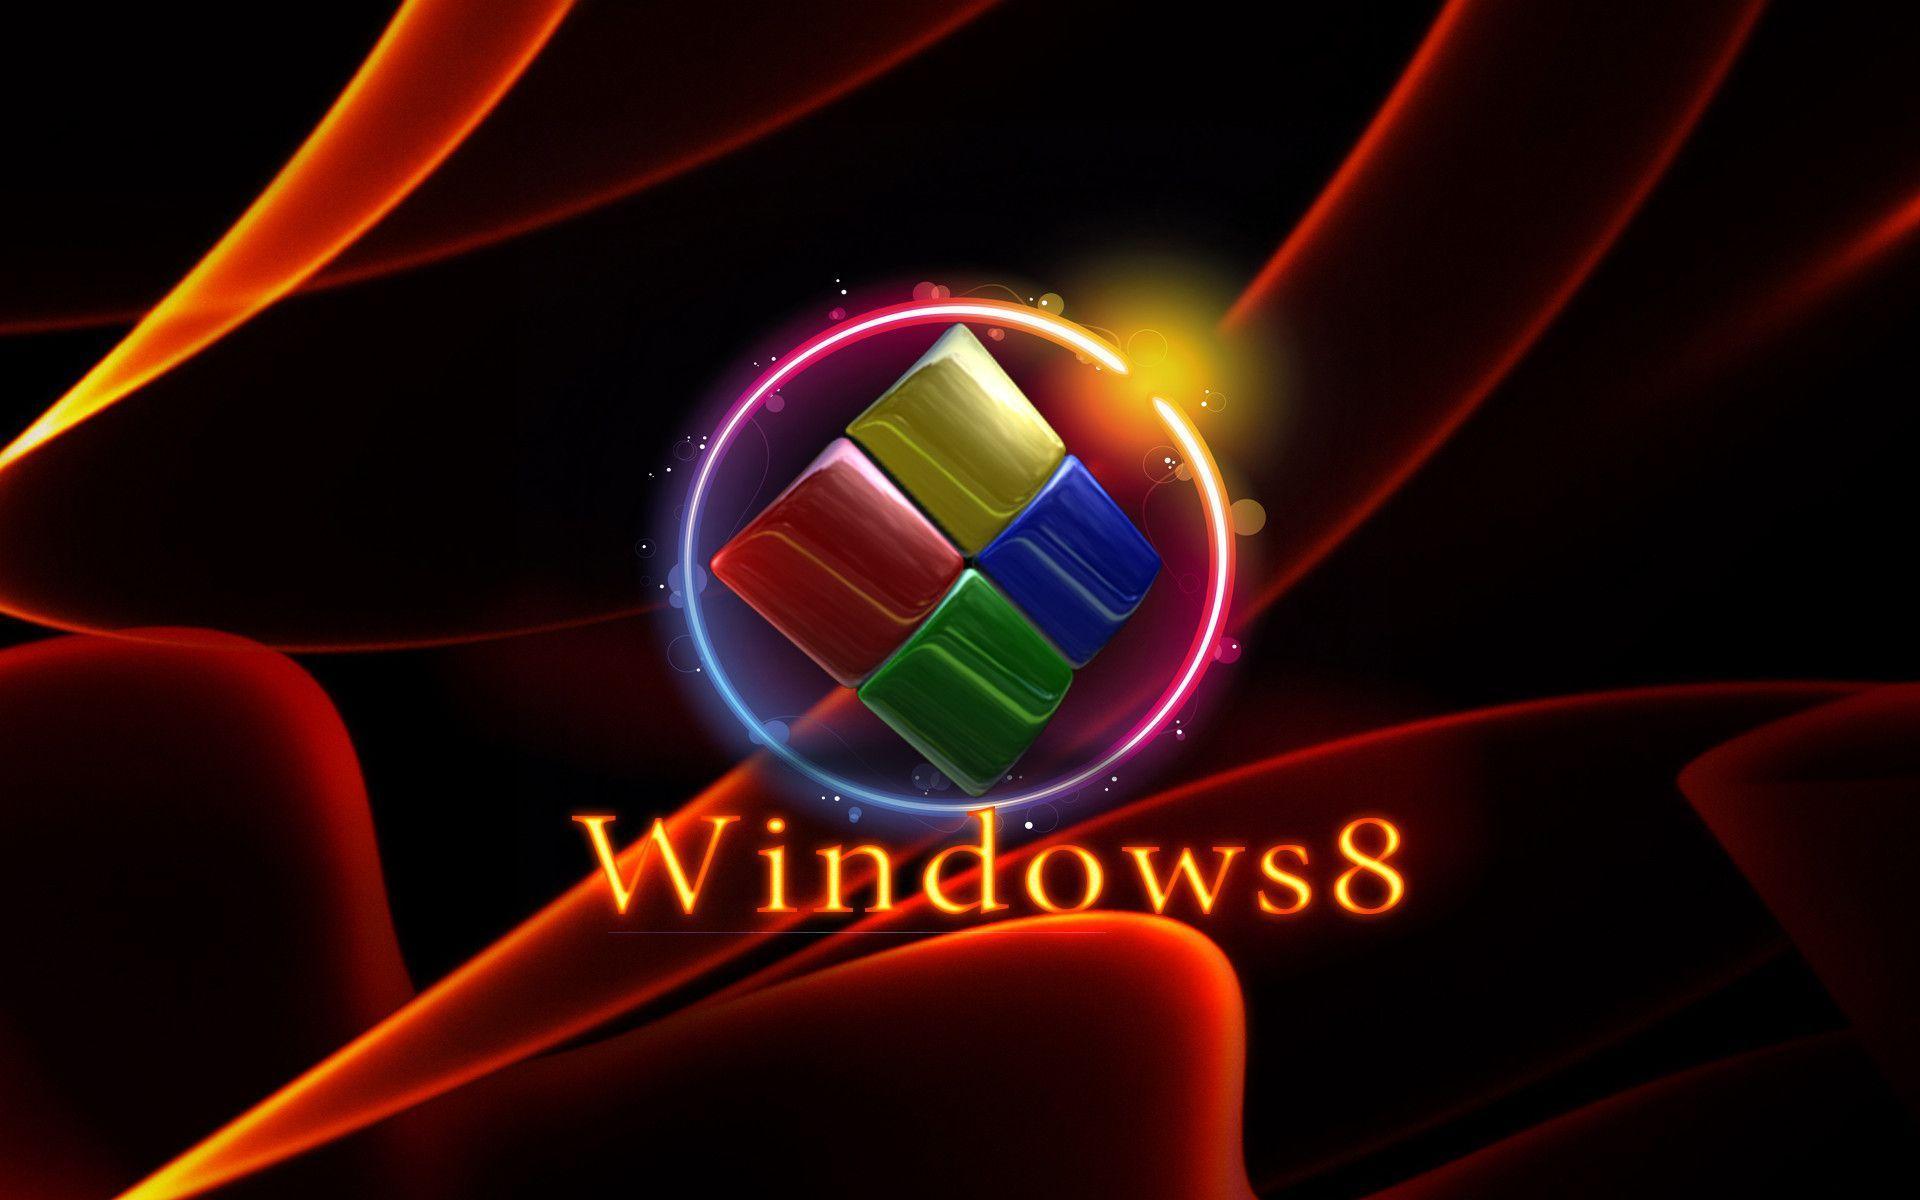 Related Pictures Windows 8 Wallpapers Abstract 1920x1200 Car Pictures